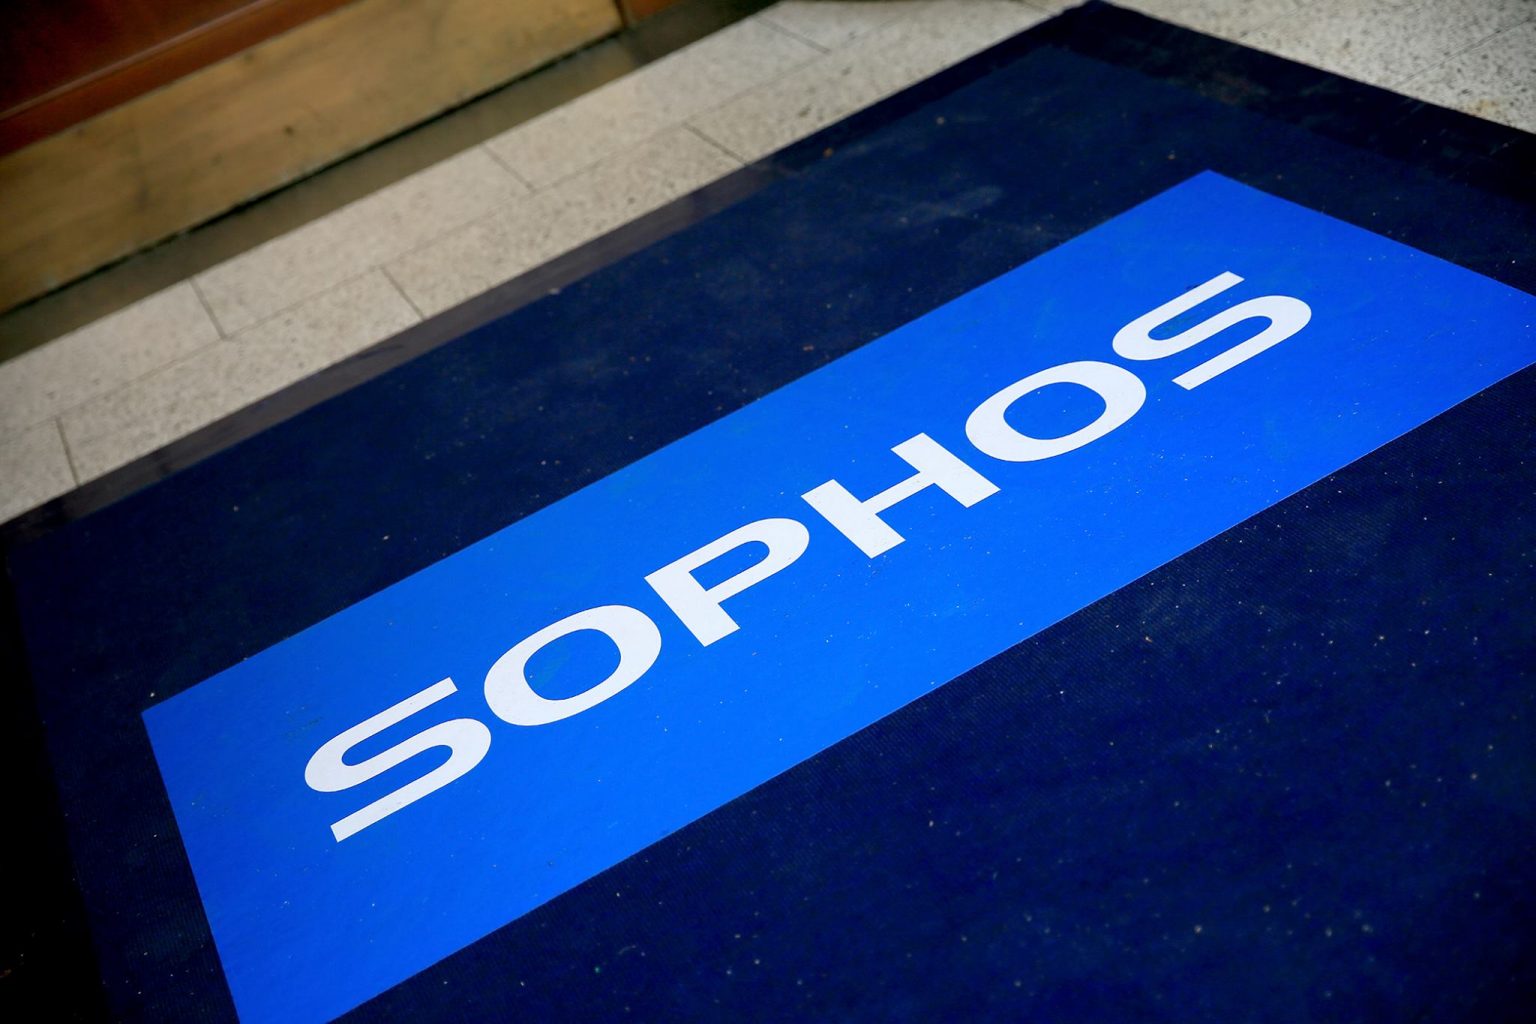 Sophos threat intelligence shows cyber attackers are exploiting unpatched systems